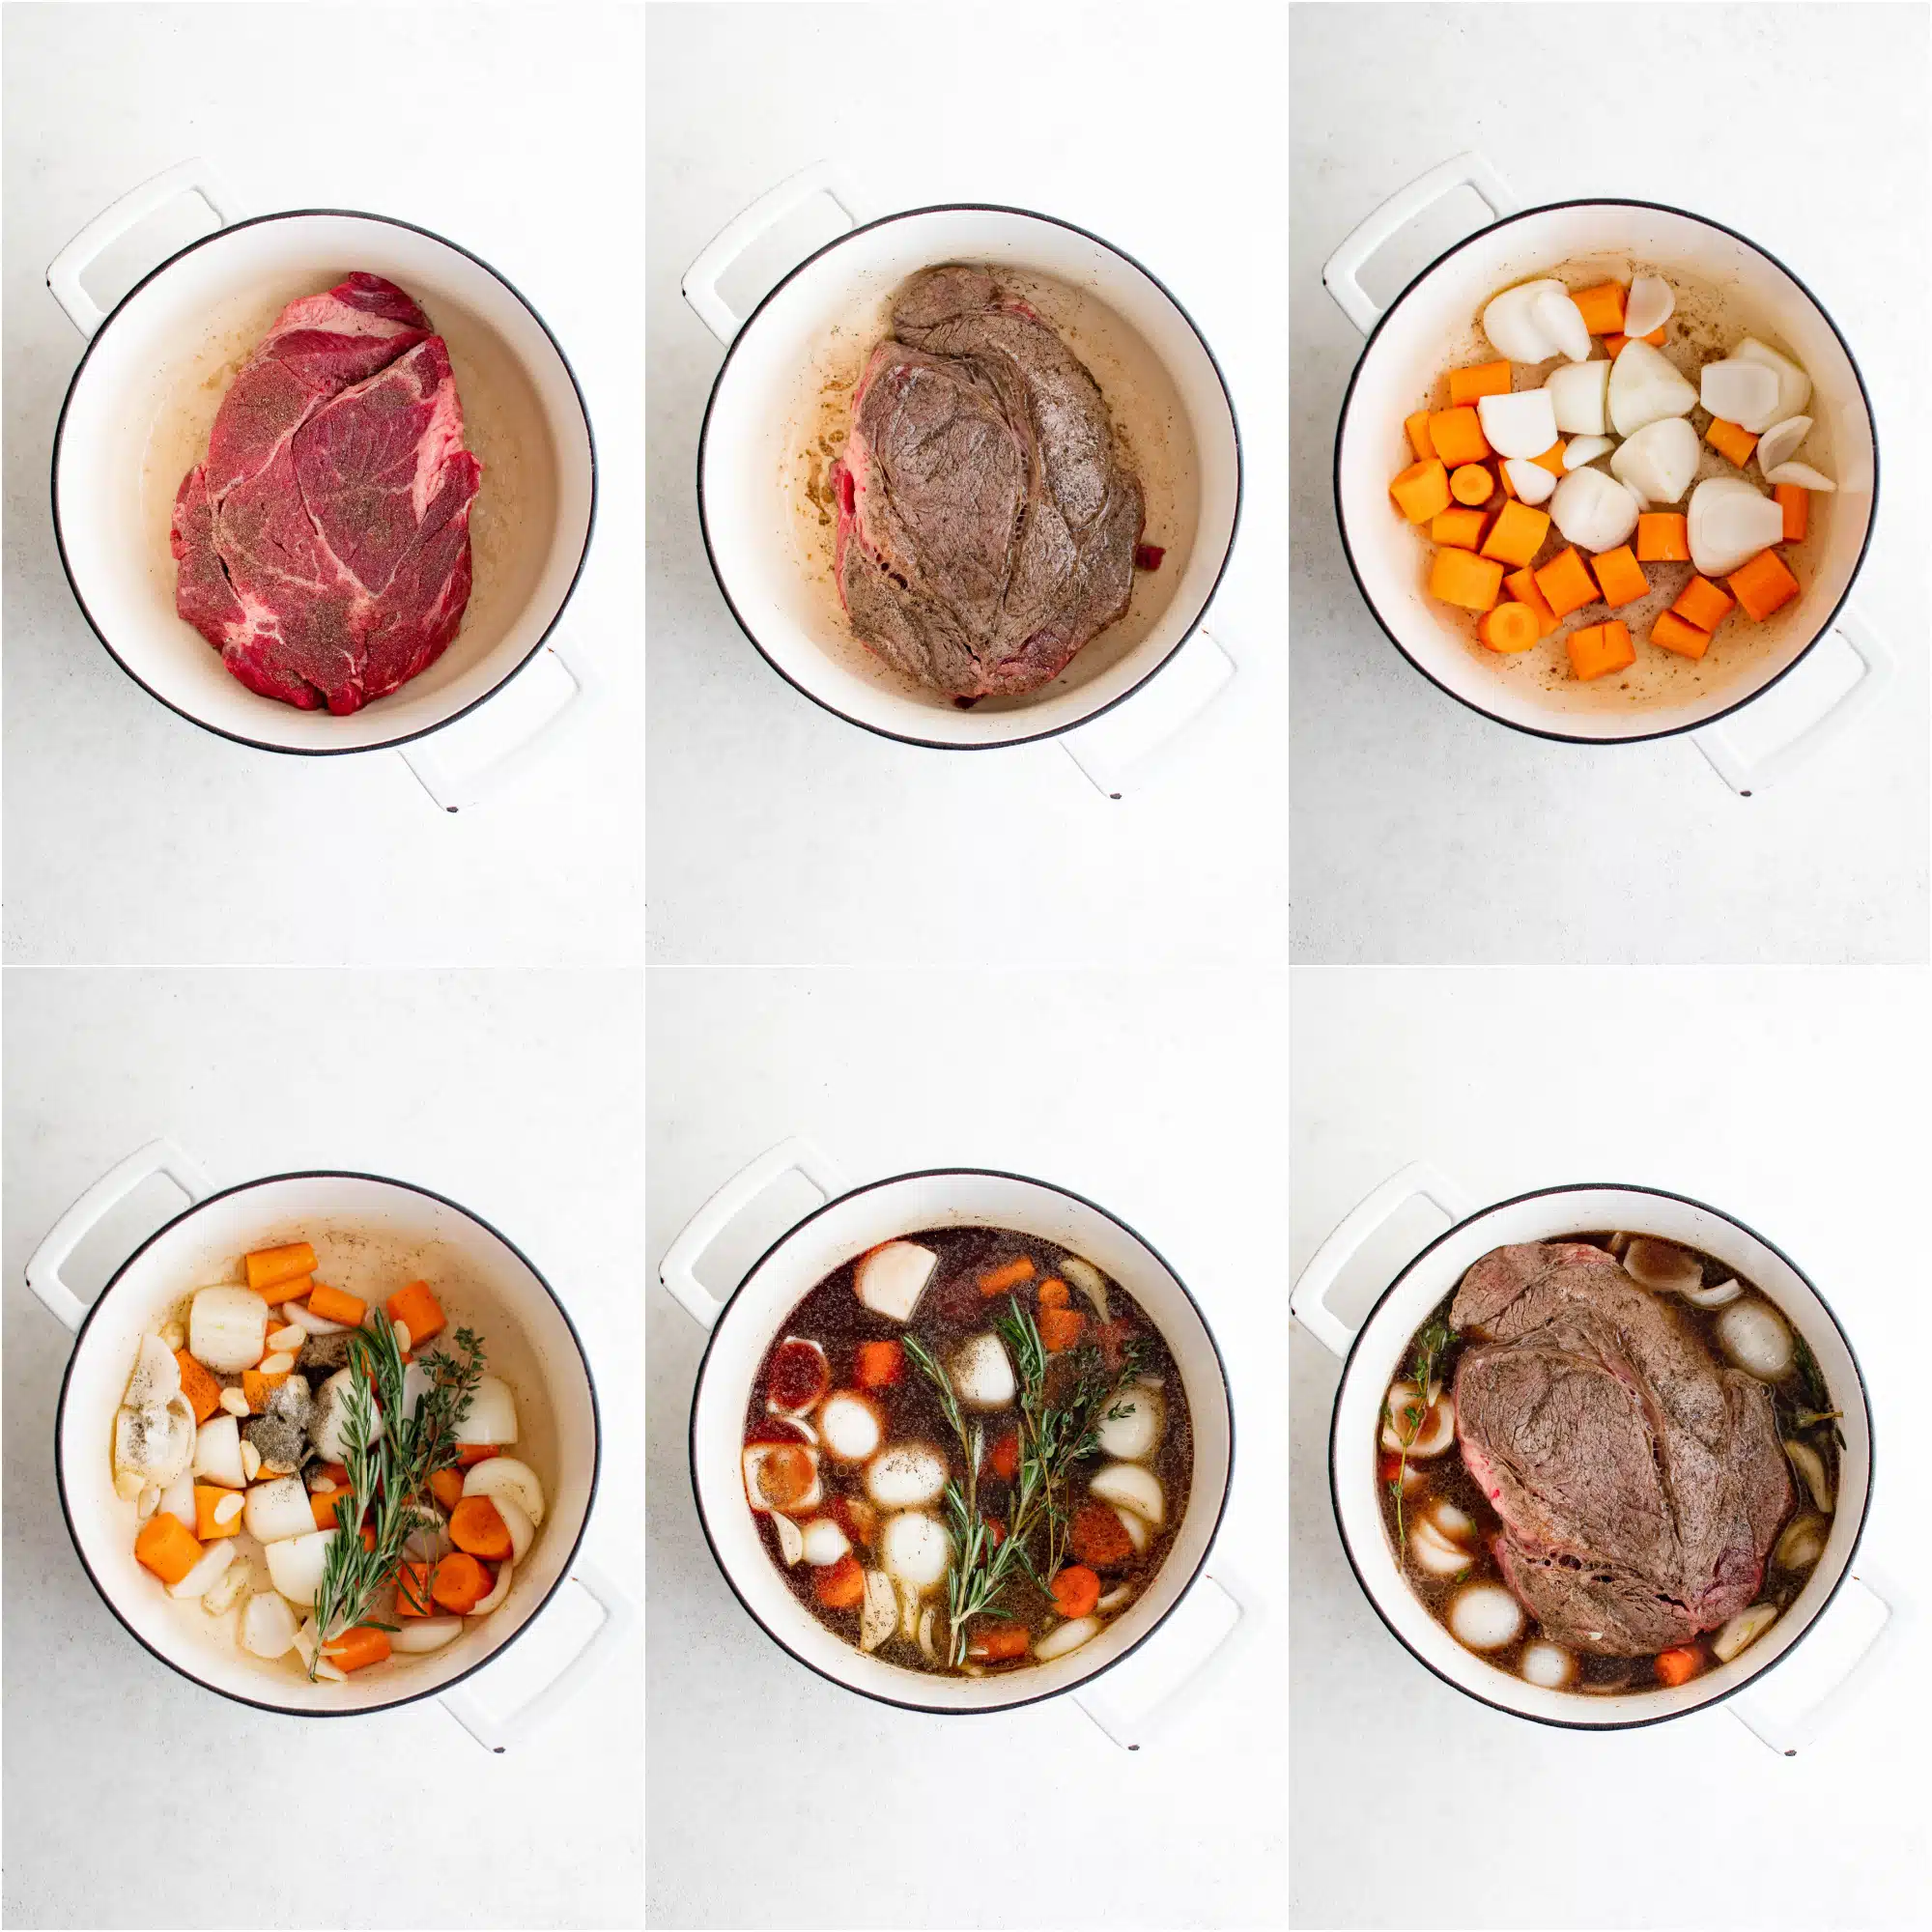 Collage of six images showing the steps in making Dutch oven pot roast: the first image shows a large uncooked beef chuck roast in a white Dutch oven; the second image shows a large seared beef chuck roast in a large Dutch oven; the third image shows a white Dutch oven filled with raw chopped carrots and onions; the fourth image shows a large white Dutch oven filled with cooking carrots and onions plus garlic, salt, pepper, and fresh herbs; the fifth image shows a large Dutch oven filled with carrots, onions, garlic, herbs, beef broth, and red wine; the sixth image shows a large white Dutch oven filled with vegetables, beef broth, red wine, and herbs with a large seared beef chuck roast placed in the center.